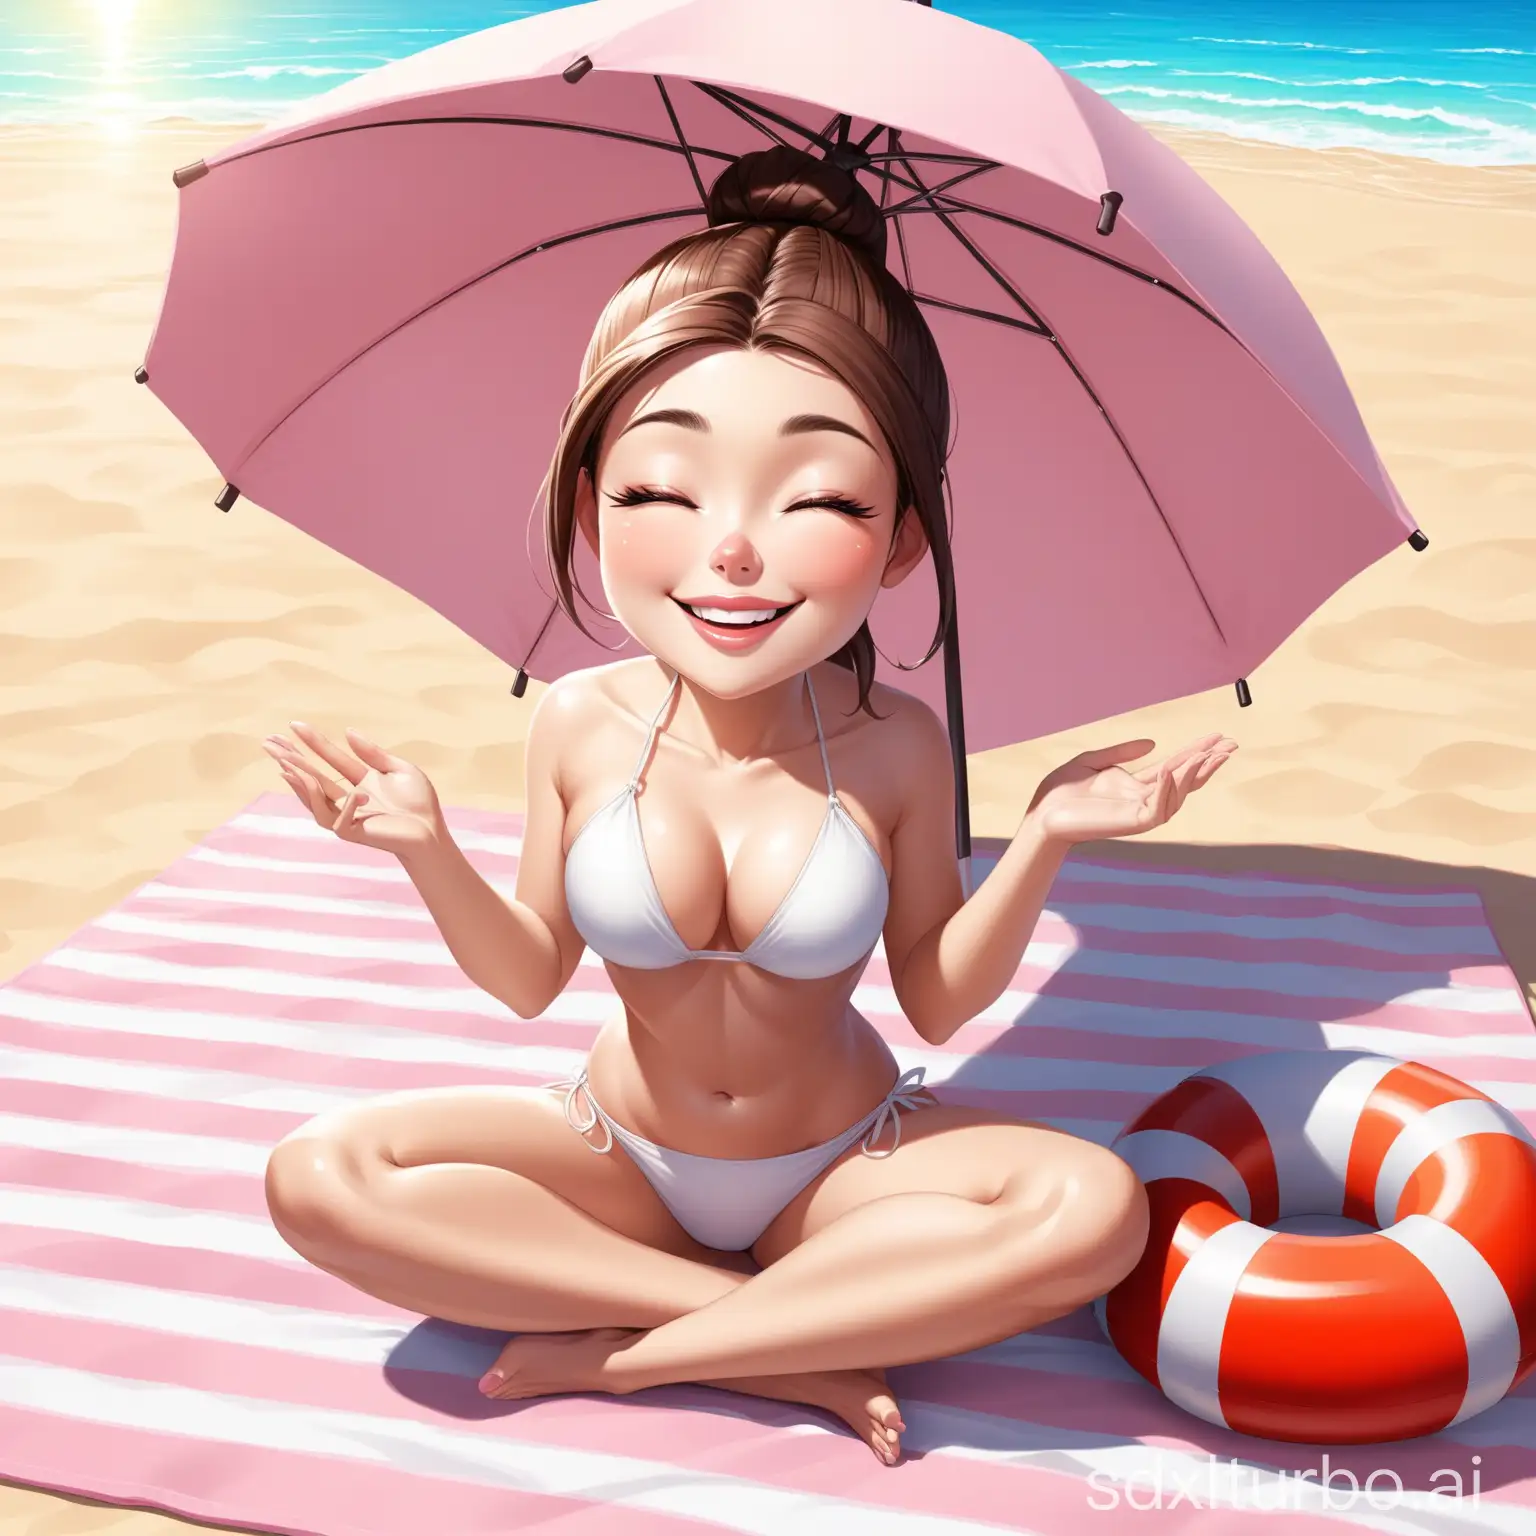 Create a realistic 3D caricature cartoon of a cheerful woman with long brown hair tied in a high bun, large closed eyes with long eyelashes, a small nose, and full pink lips forming a wide smile. She is wearing a white bikini with black string details and sitting cross-legged on a pink mat in a meditation pose. The background is a sunny beach with lifebuoys, beach bags, and a beach umbrella